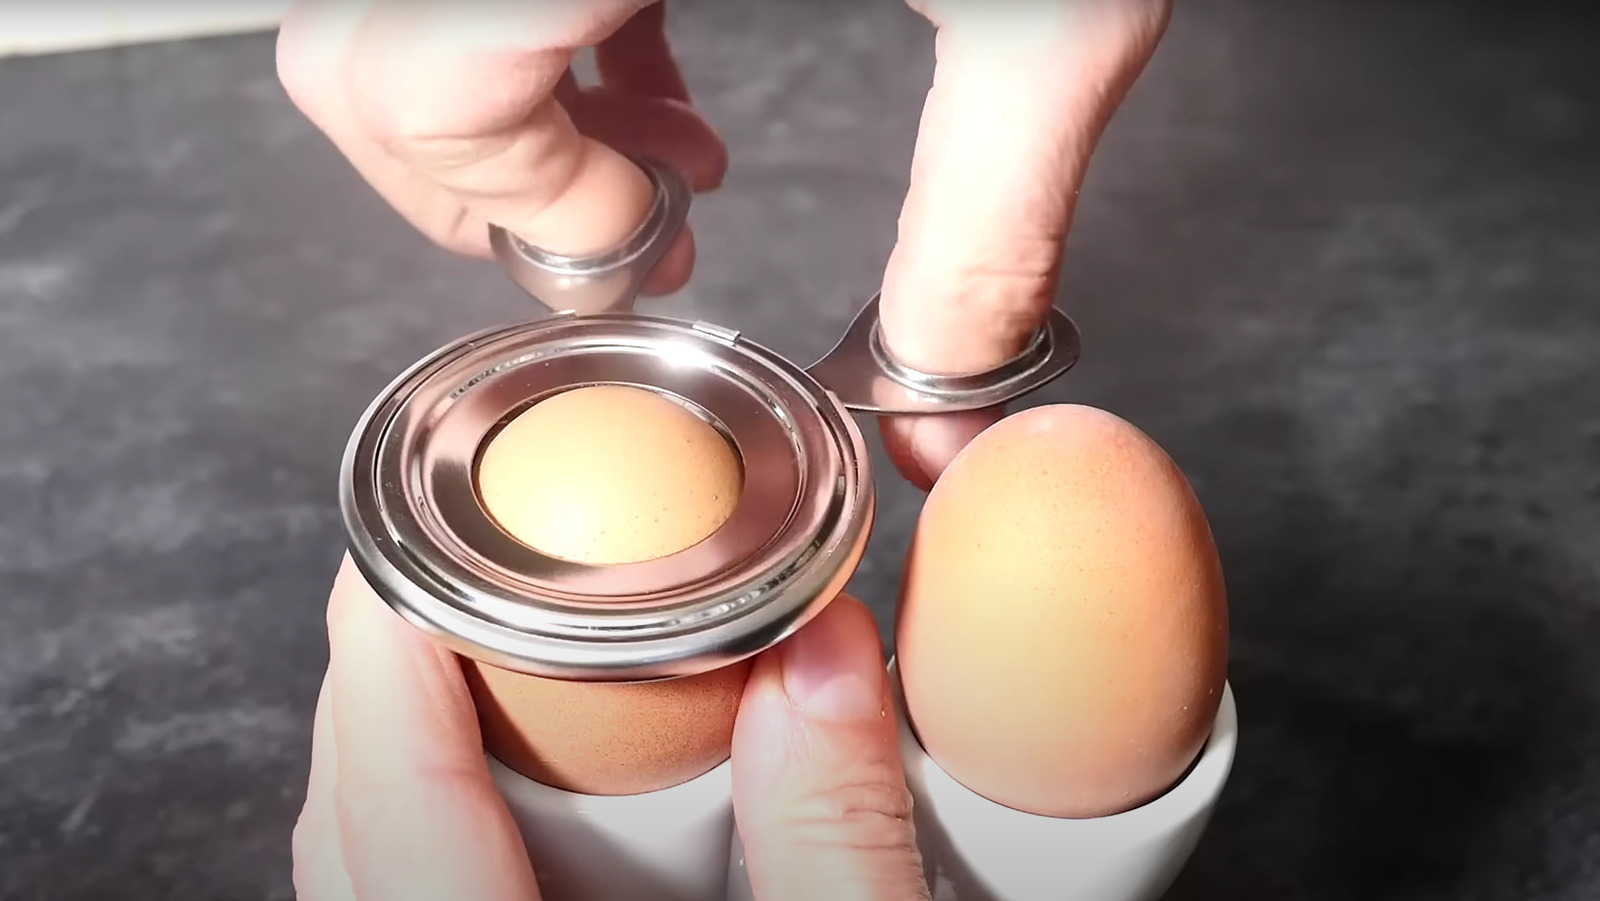 https://www.foodrepublic.com/img/gallery/is-it-ever-worth-it-to-own-an-egg-topper/l-intro-1699884911.jpg